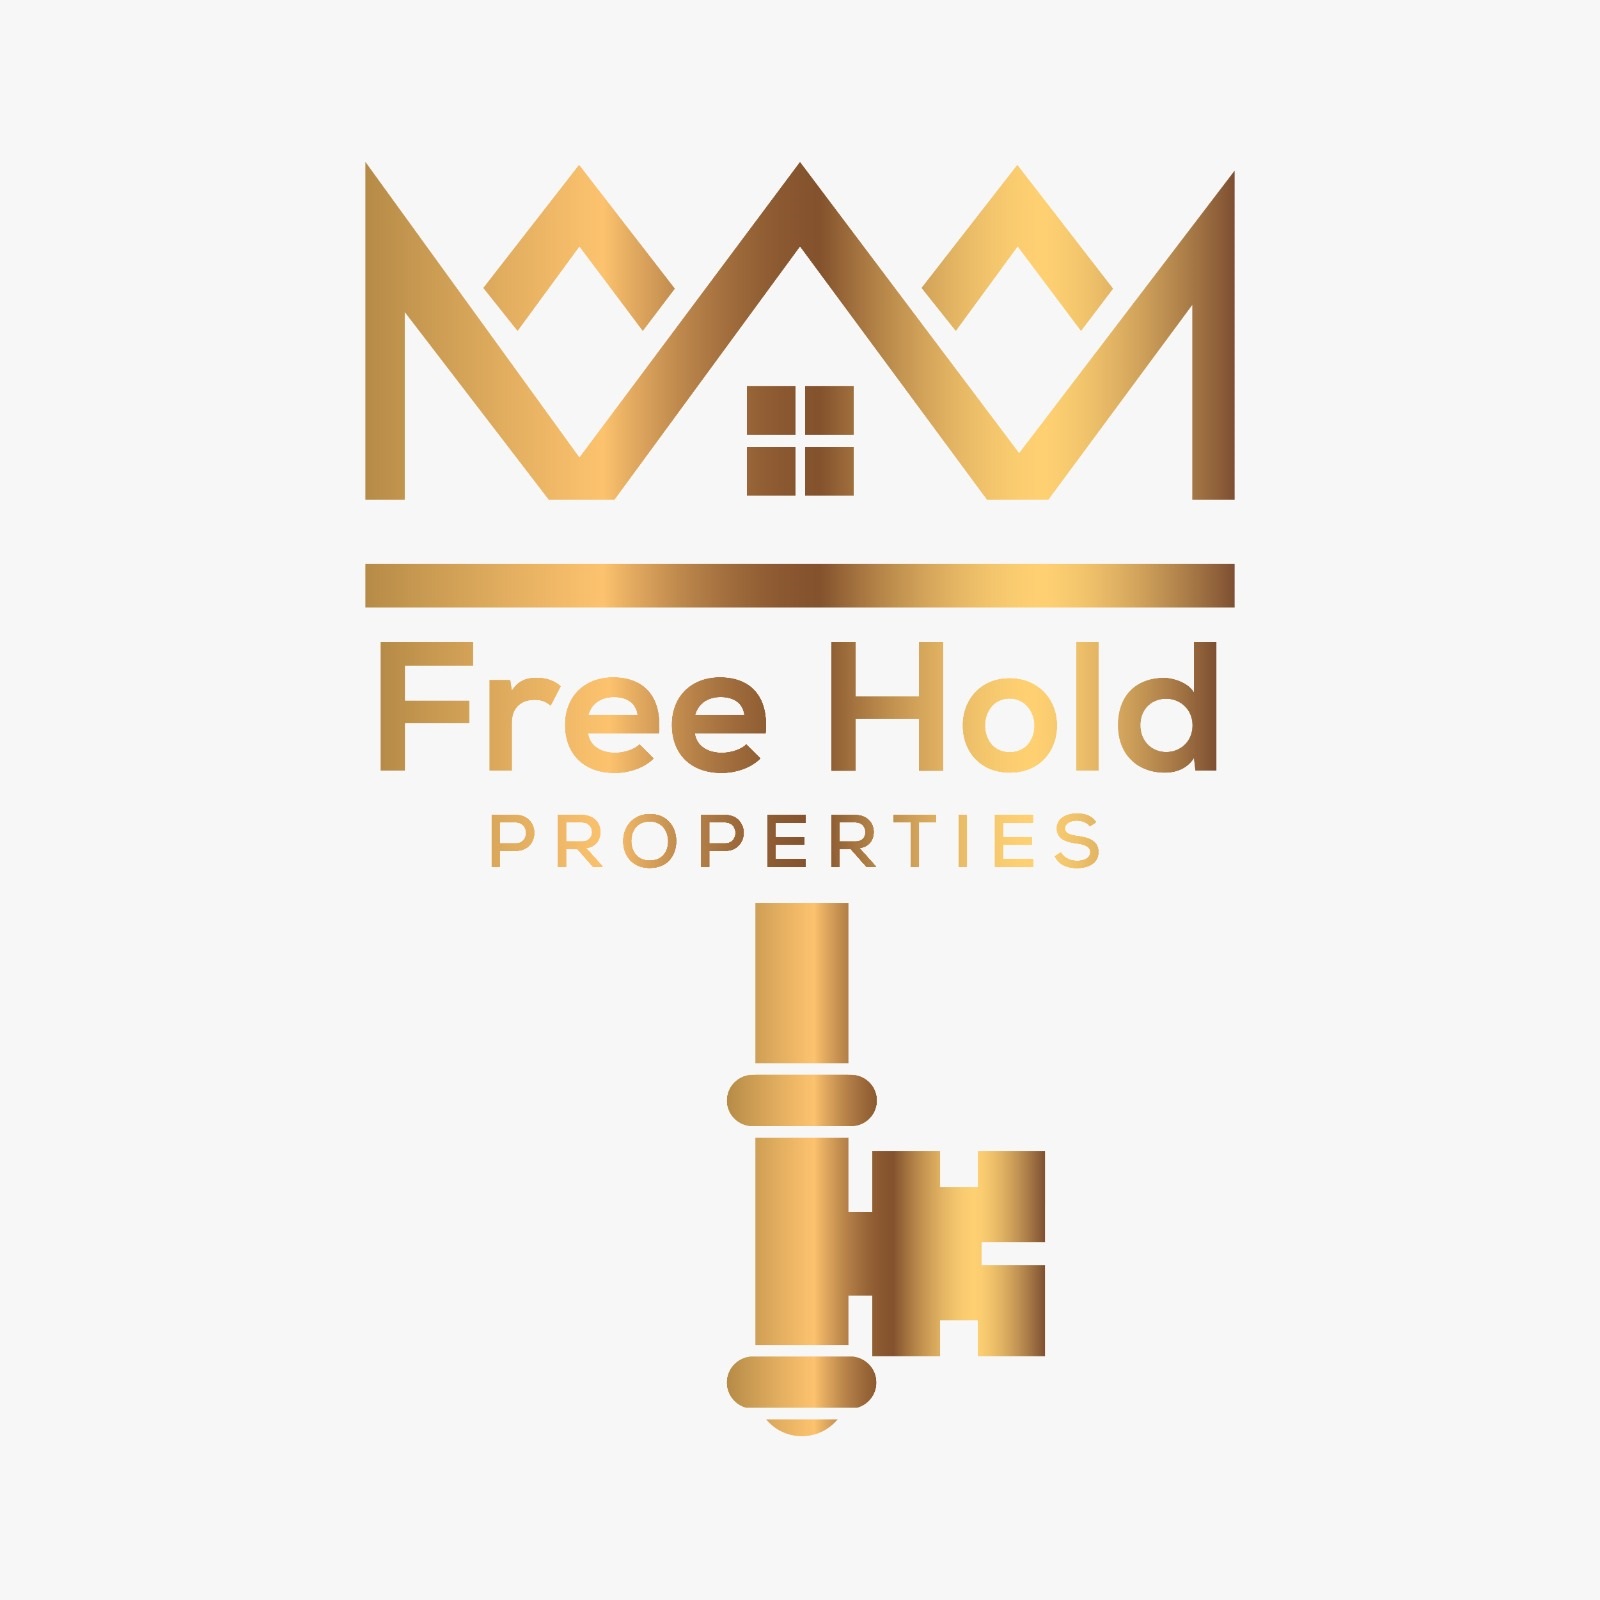 Free Hold Propertie